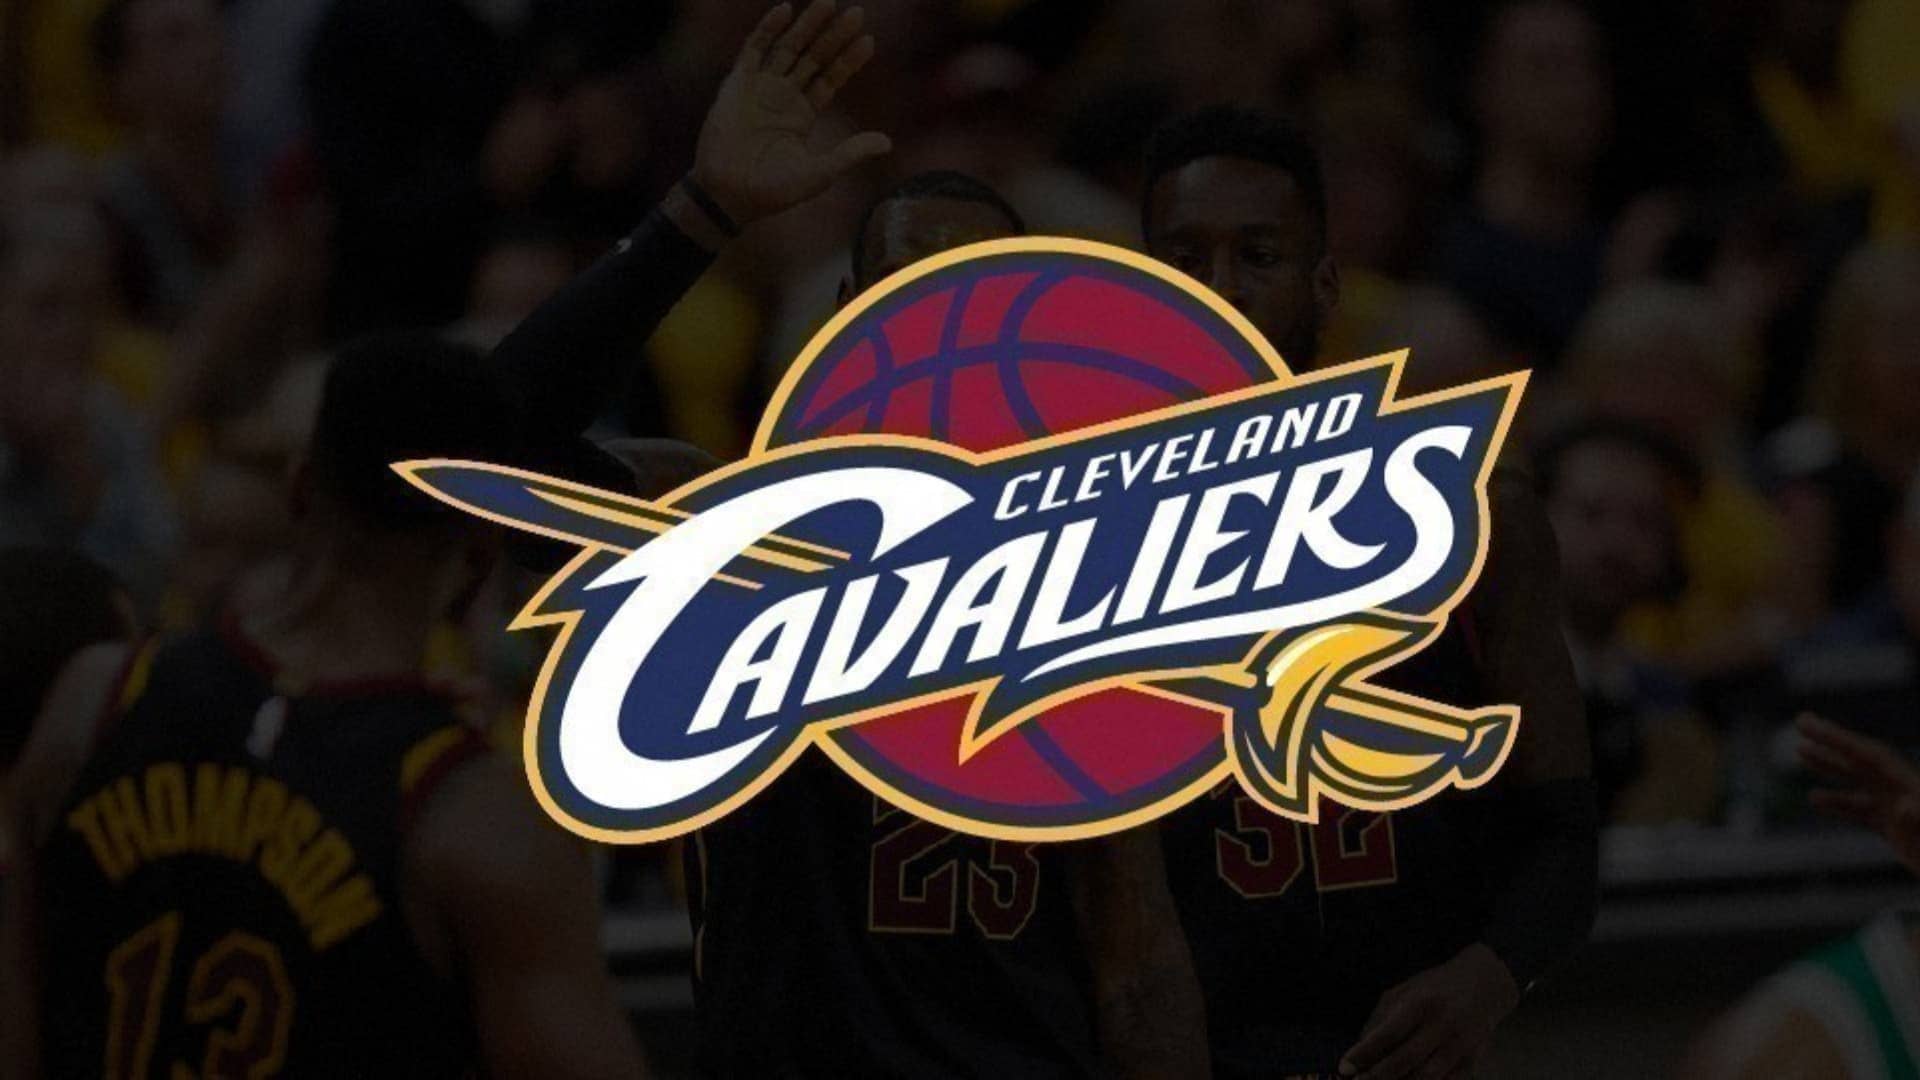 Cleveland Cavaliers- most followed NBA teams on Instagram